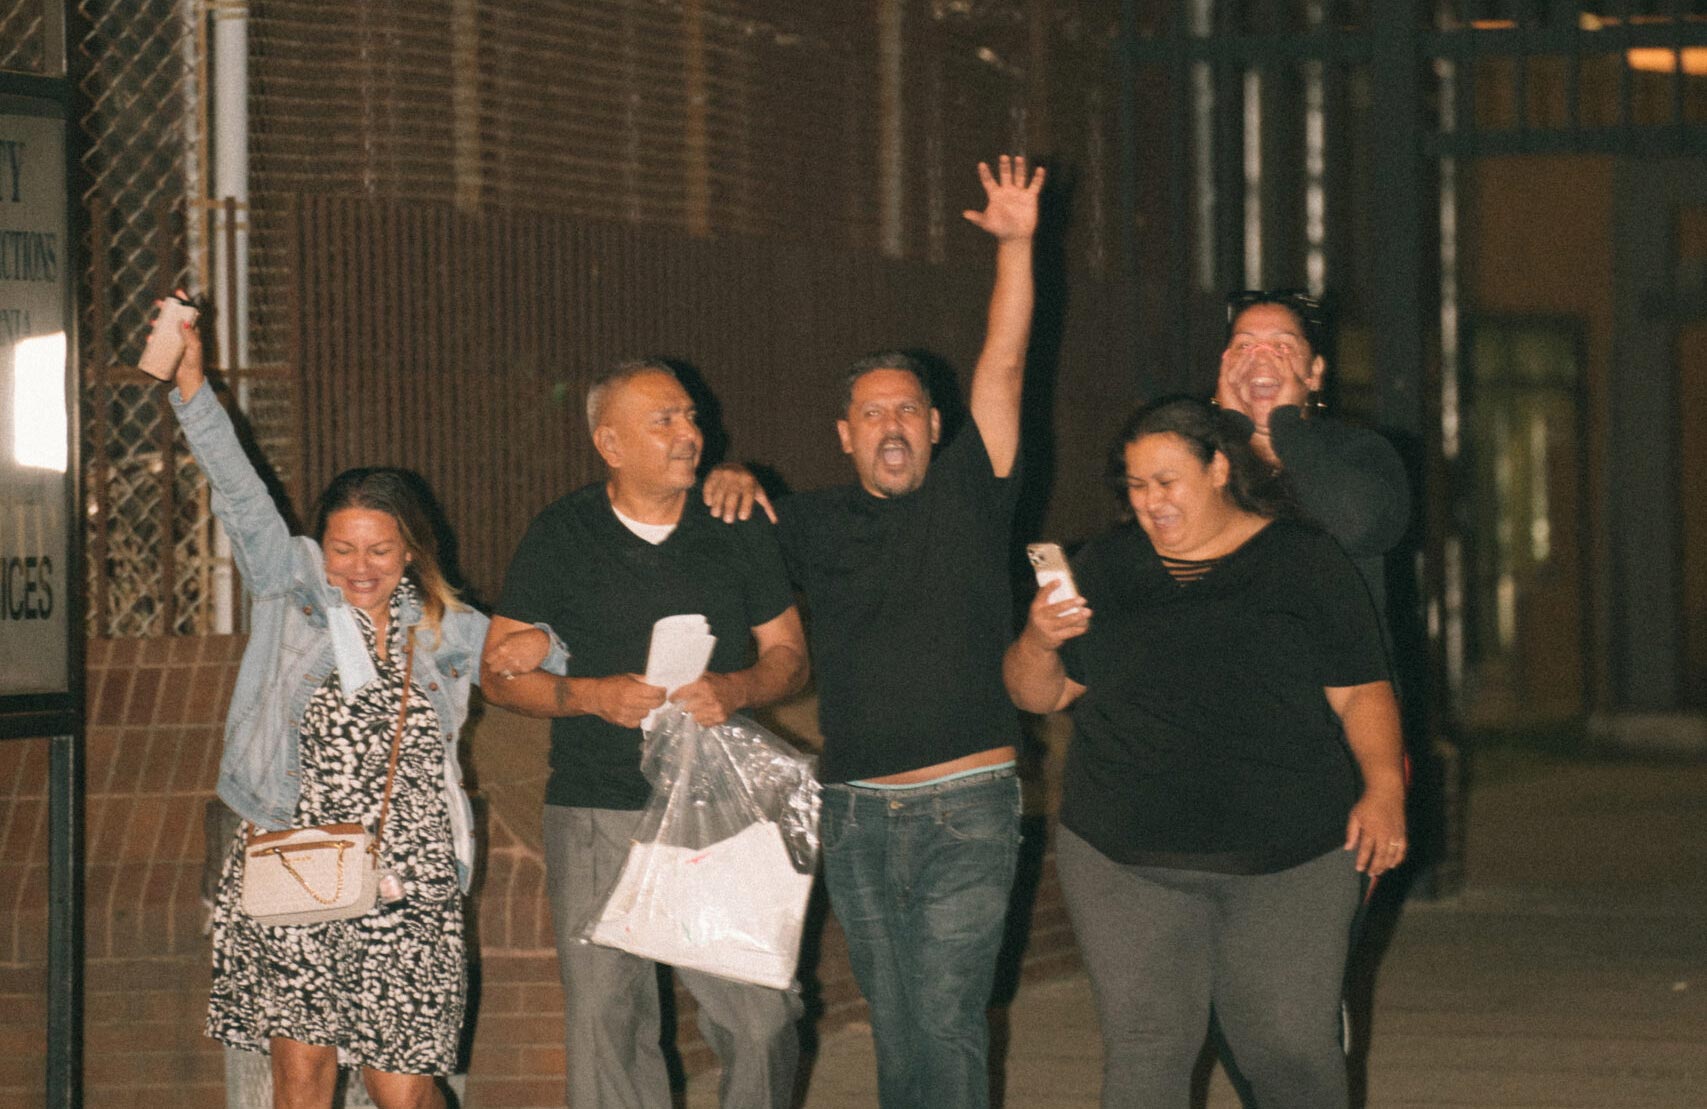 Exoneration Project client Arthur Almendarez walking out of Cook County Jail with his family after 35 years in prison for a crime he didn't commit. (Image: Ray Abercrombie for the Innocence Project)